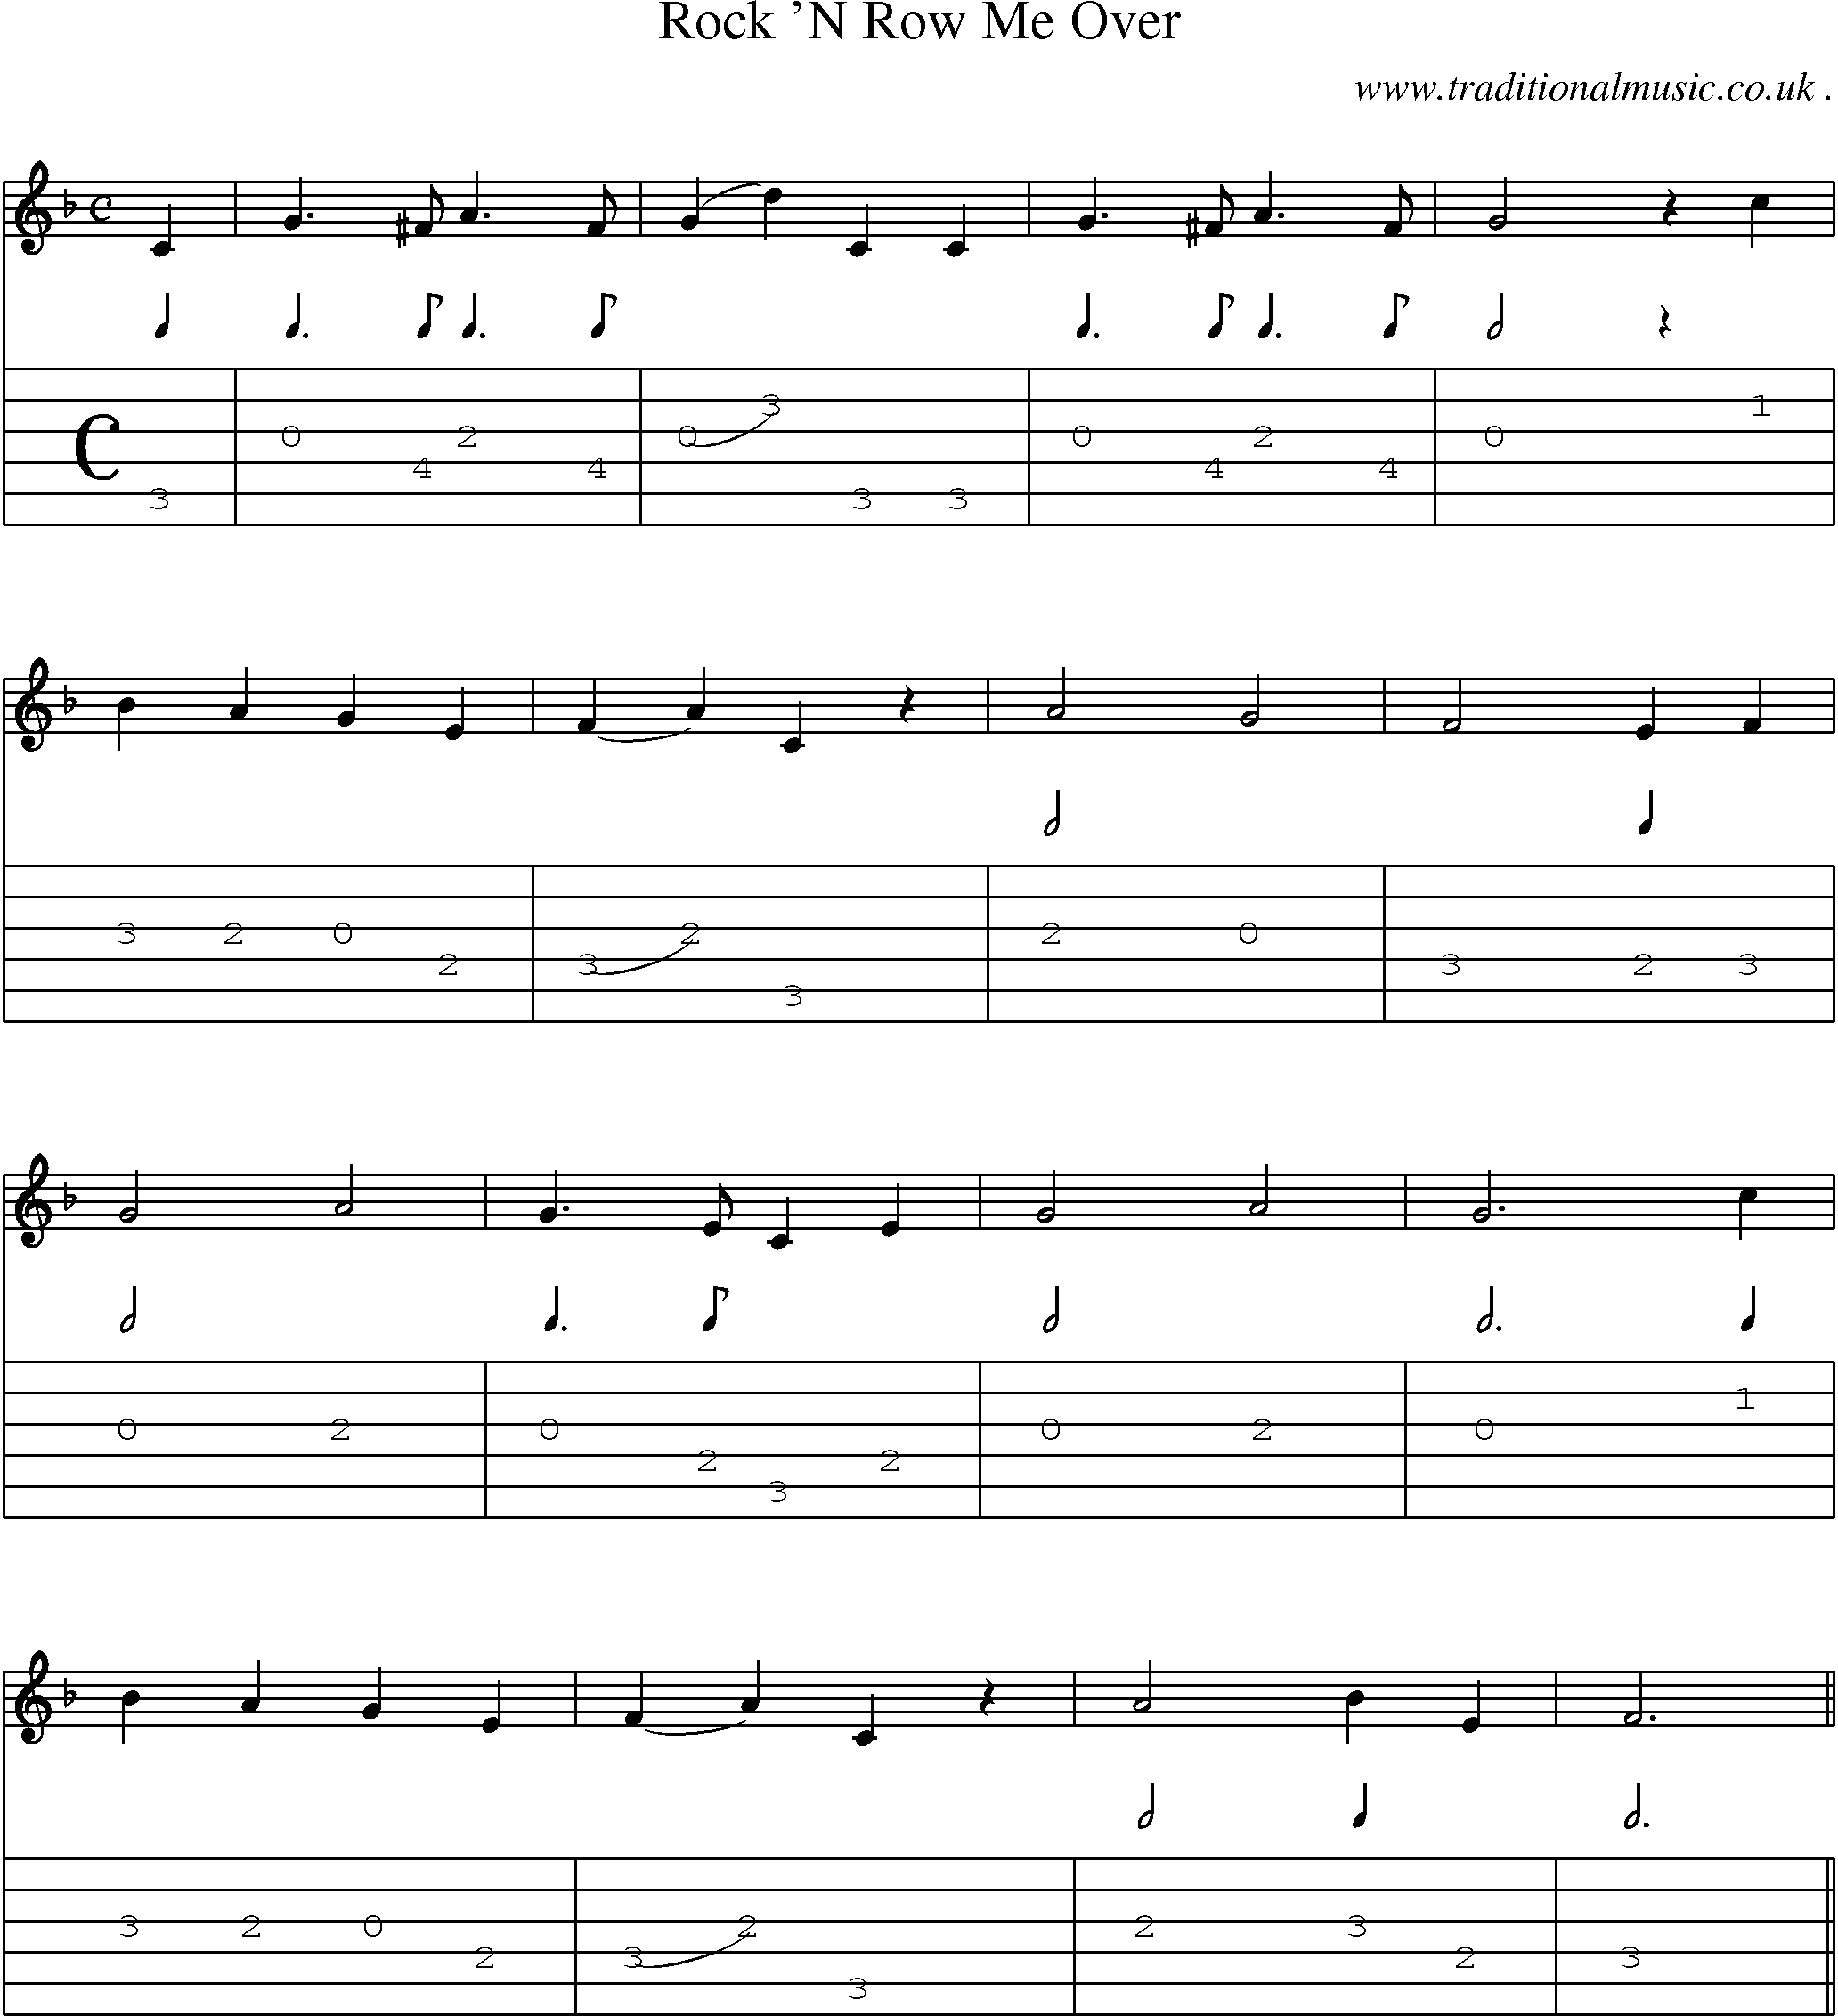 Sheet-Music and Guitar Tabs for Rock N Row Me Over